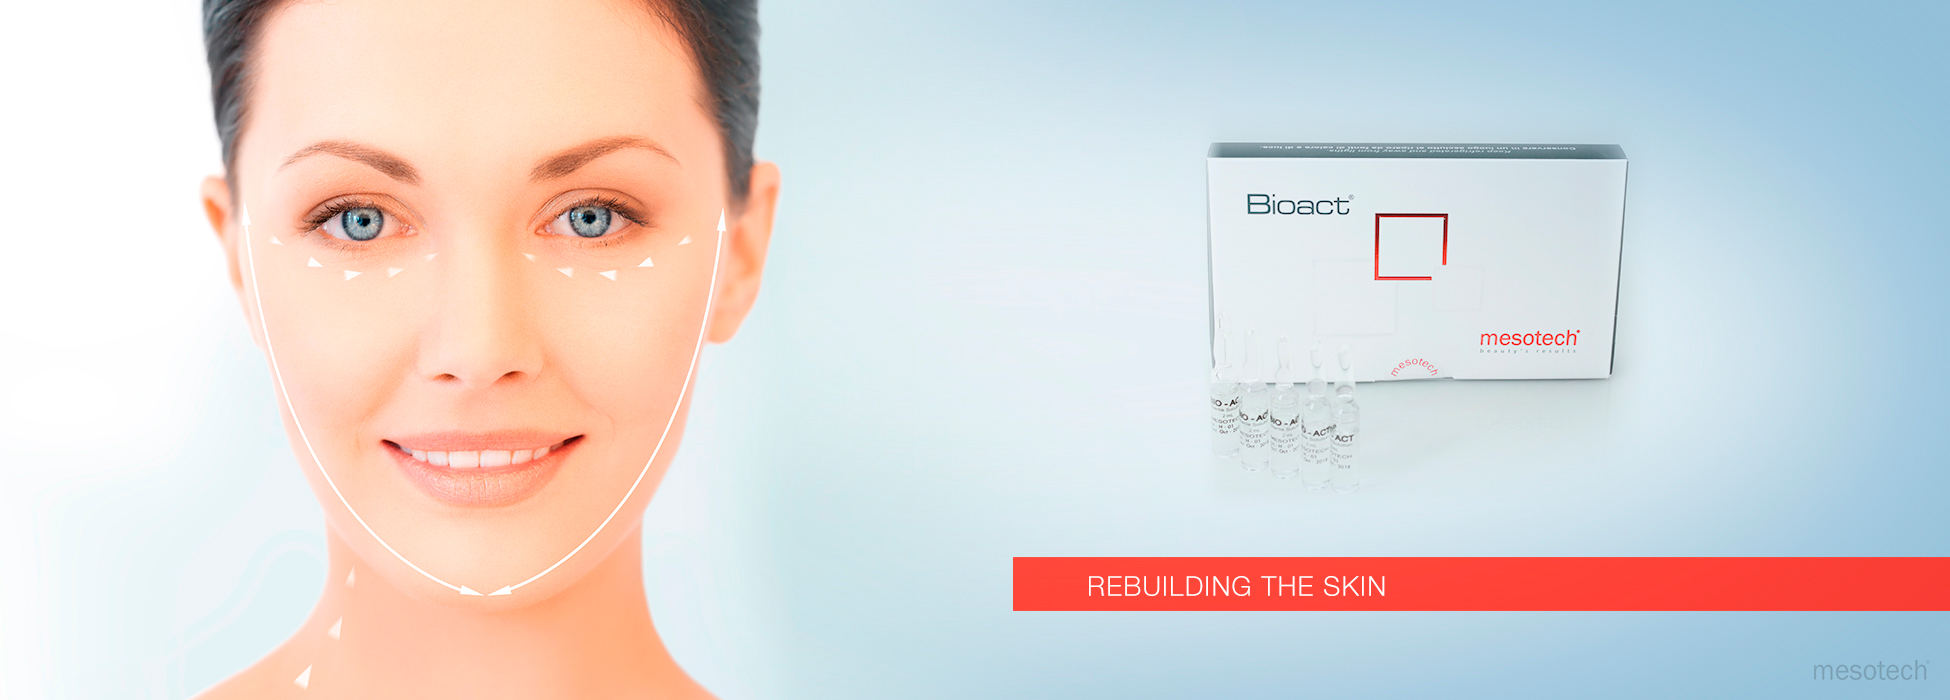 Bioact - by Mesotech mesotherapy and cosmetics 